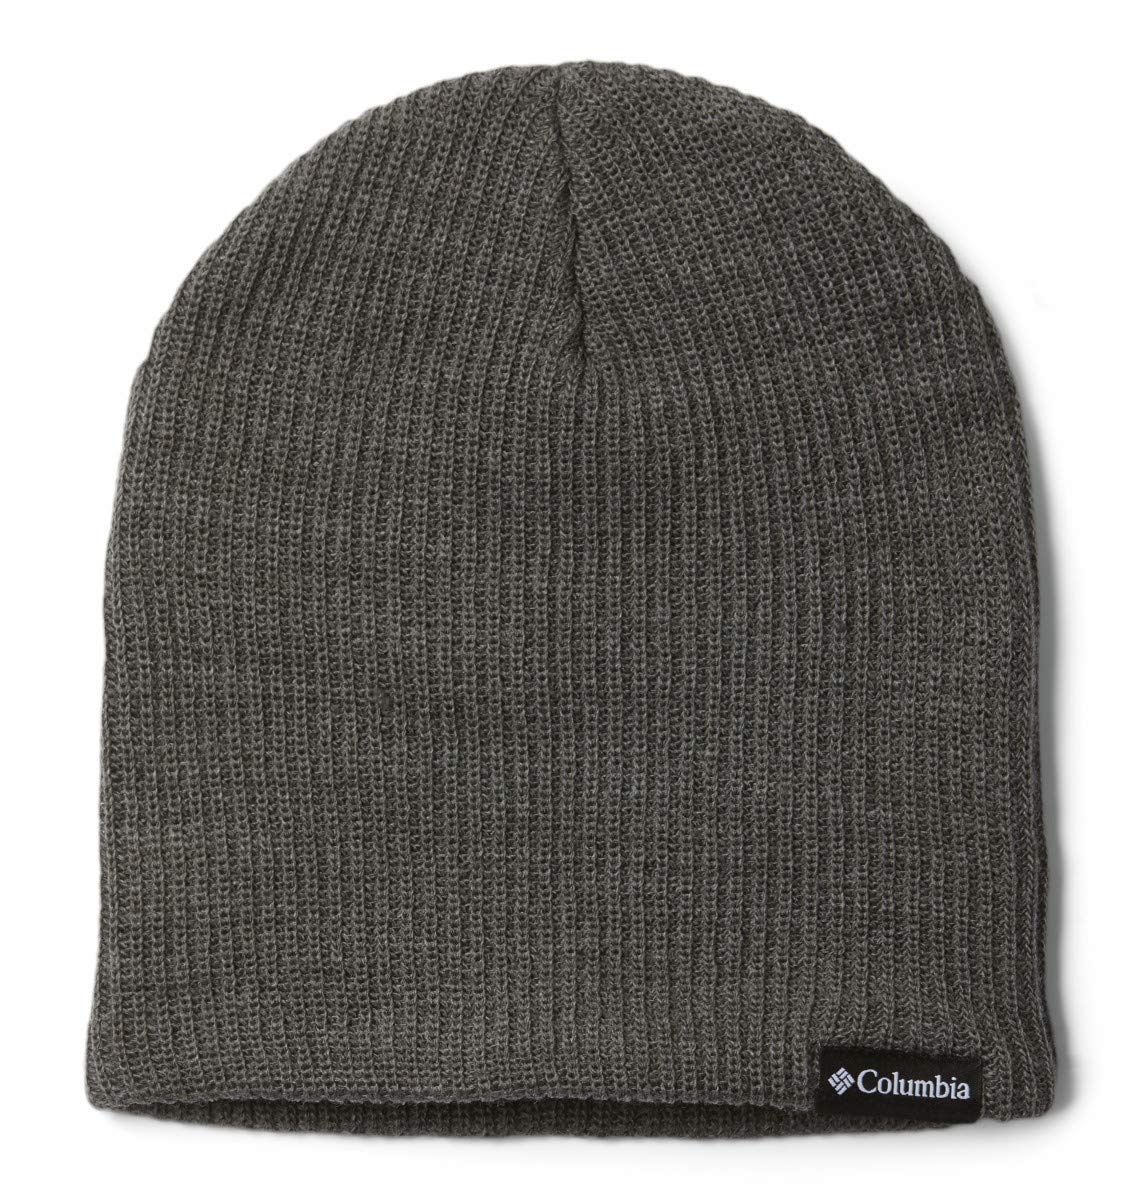 Columbia Ale Creek Beanie Hat (Charcoal Heather) $3.65 + Free Shipping w/ Prime or on $35+